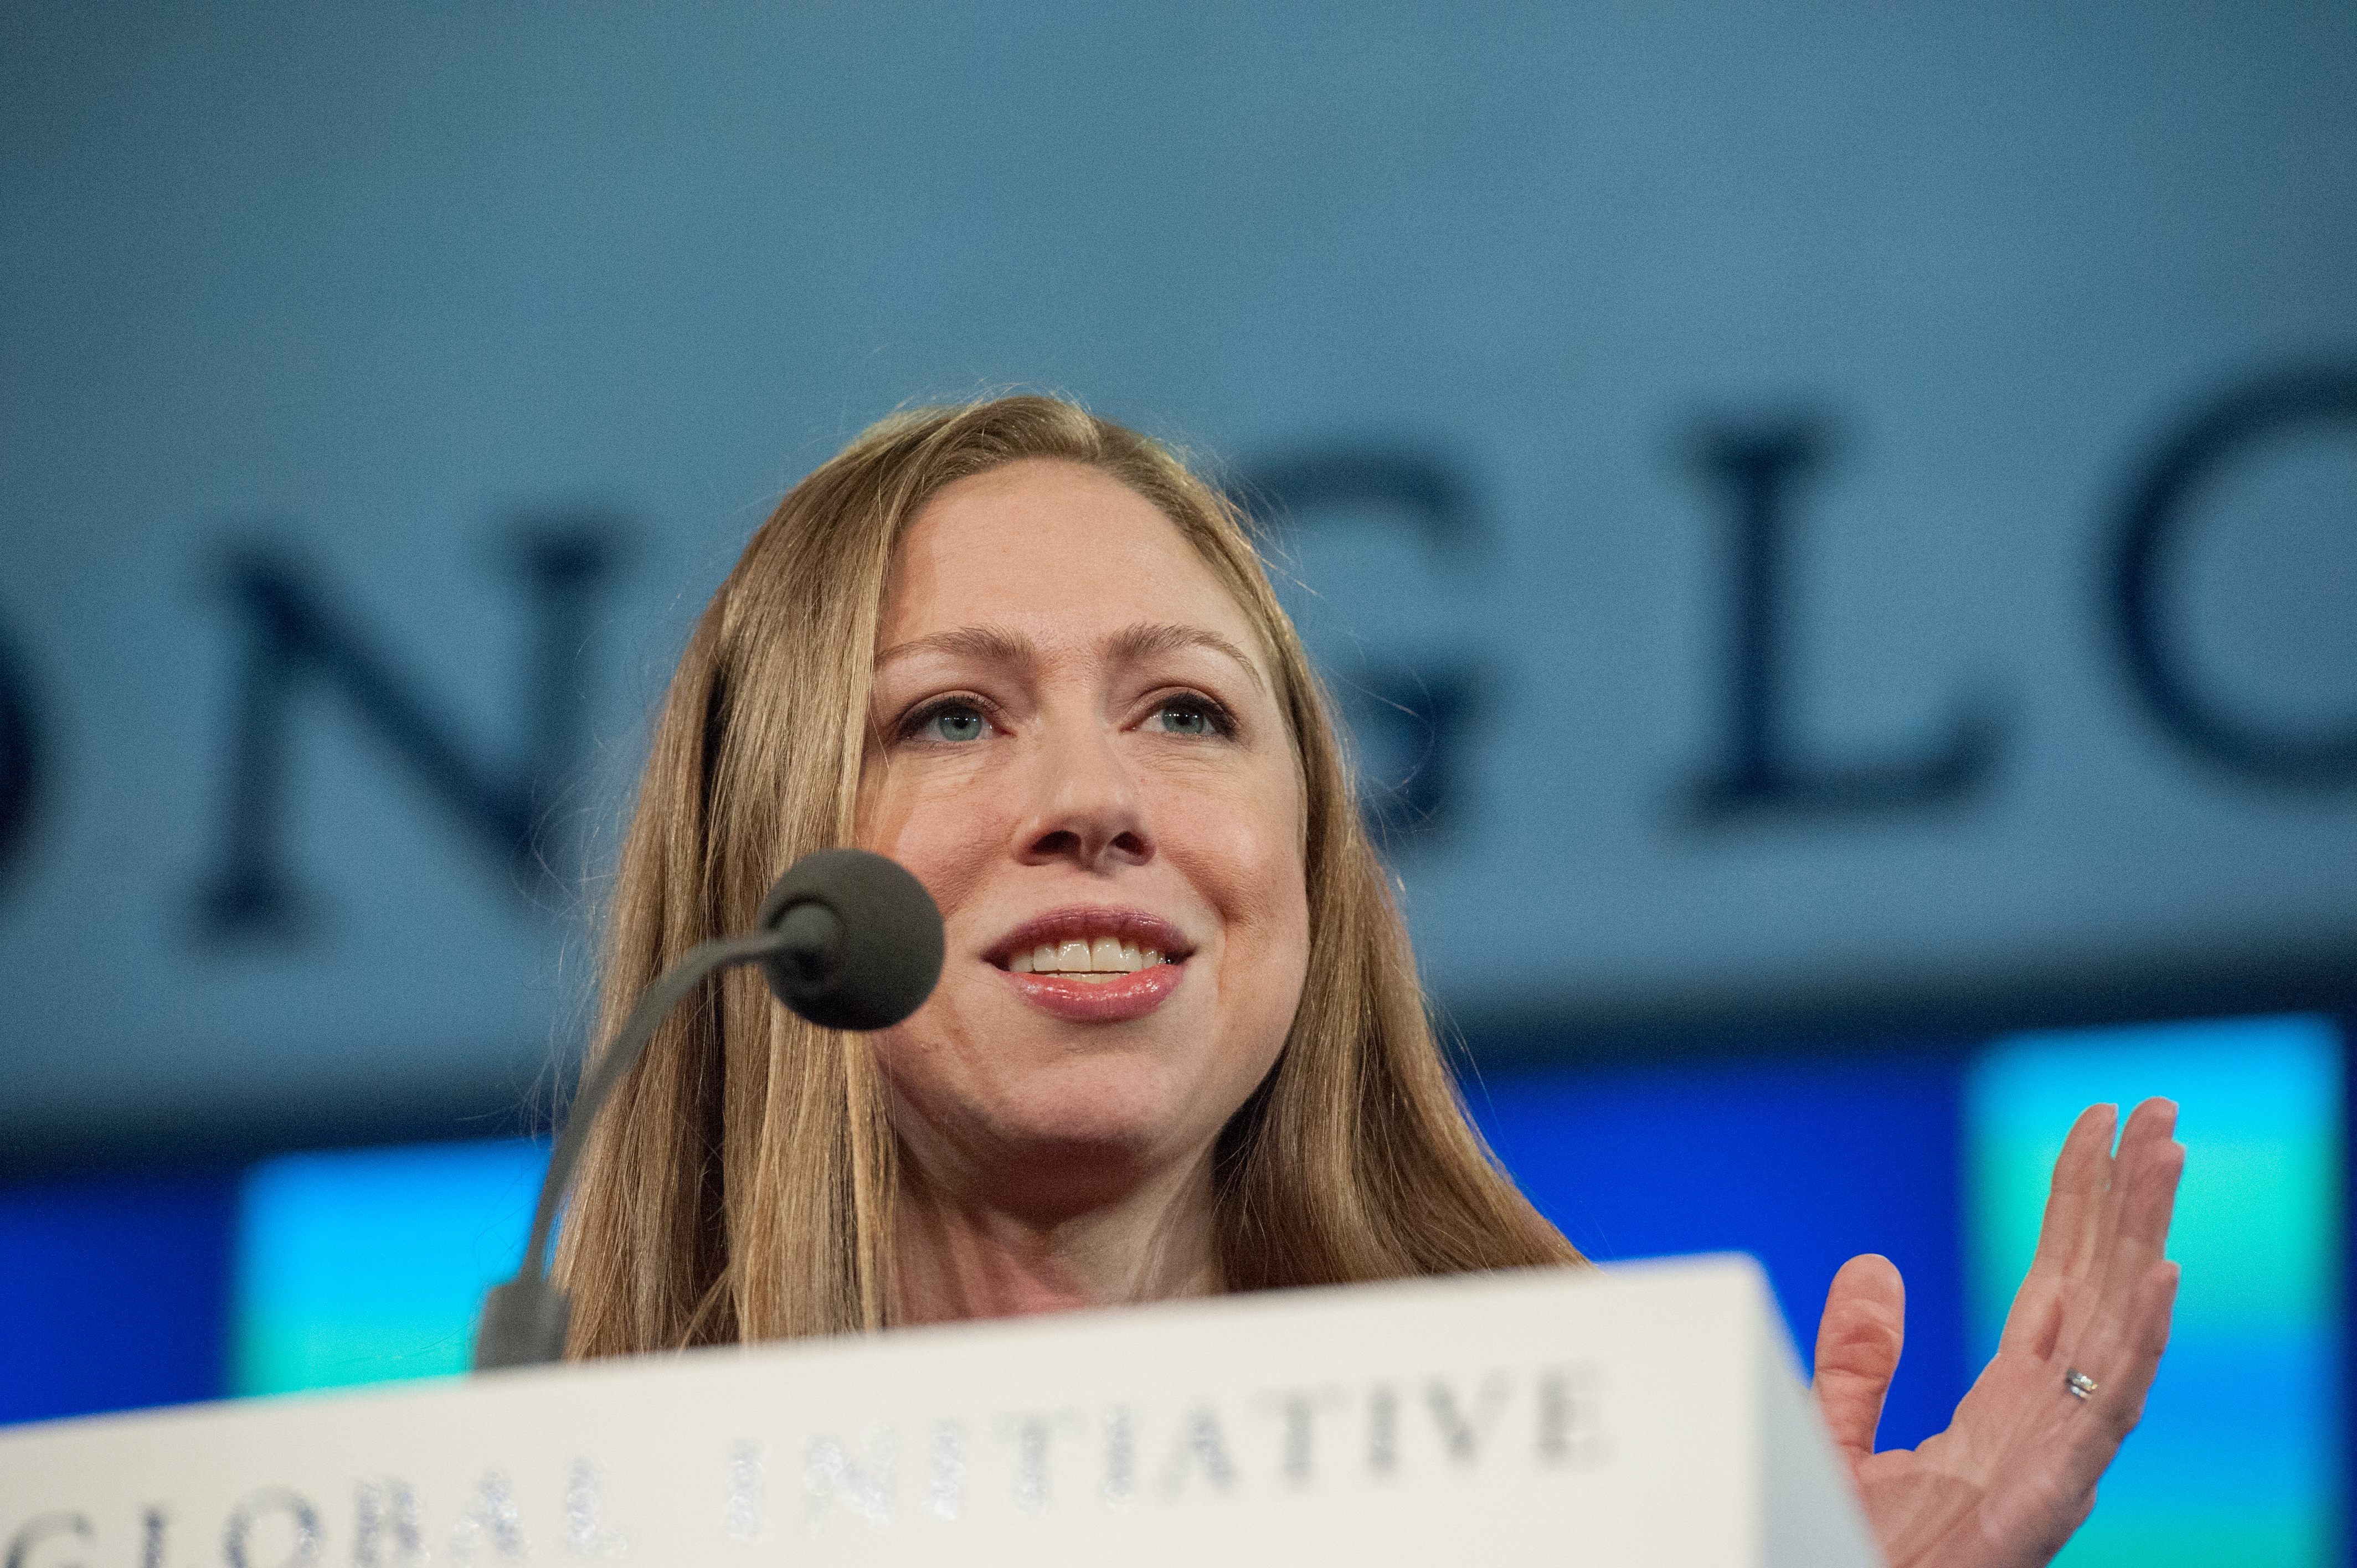 Chelsea Clinton delivers a speech during the annual Clinton Global Initiative on September 21, 2016 in New York City. (Stephanie Keith—Getty Images)